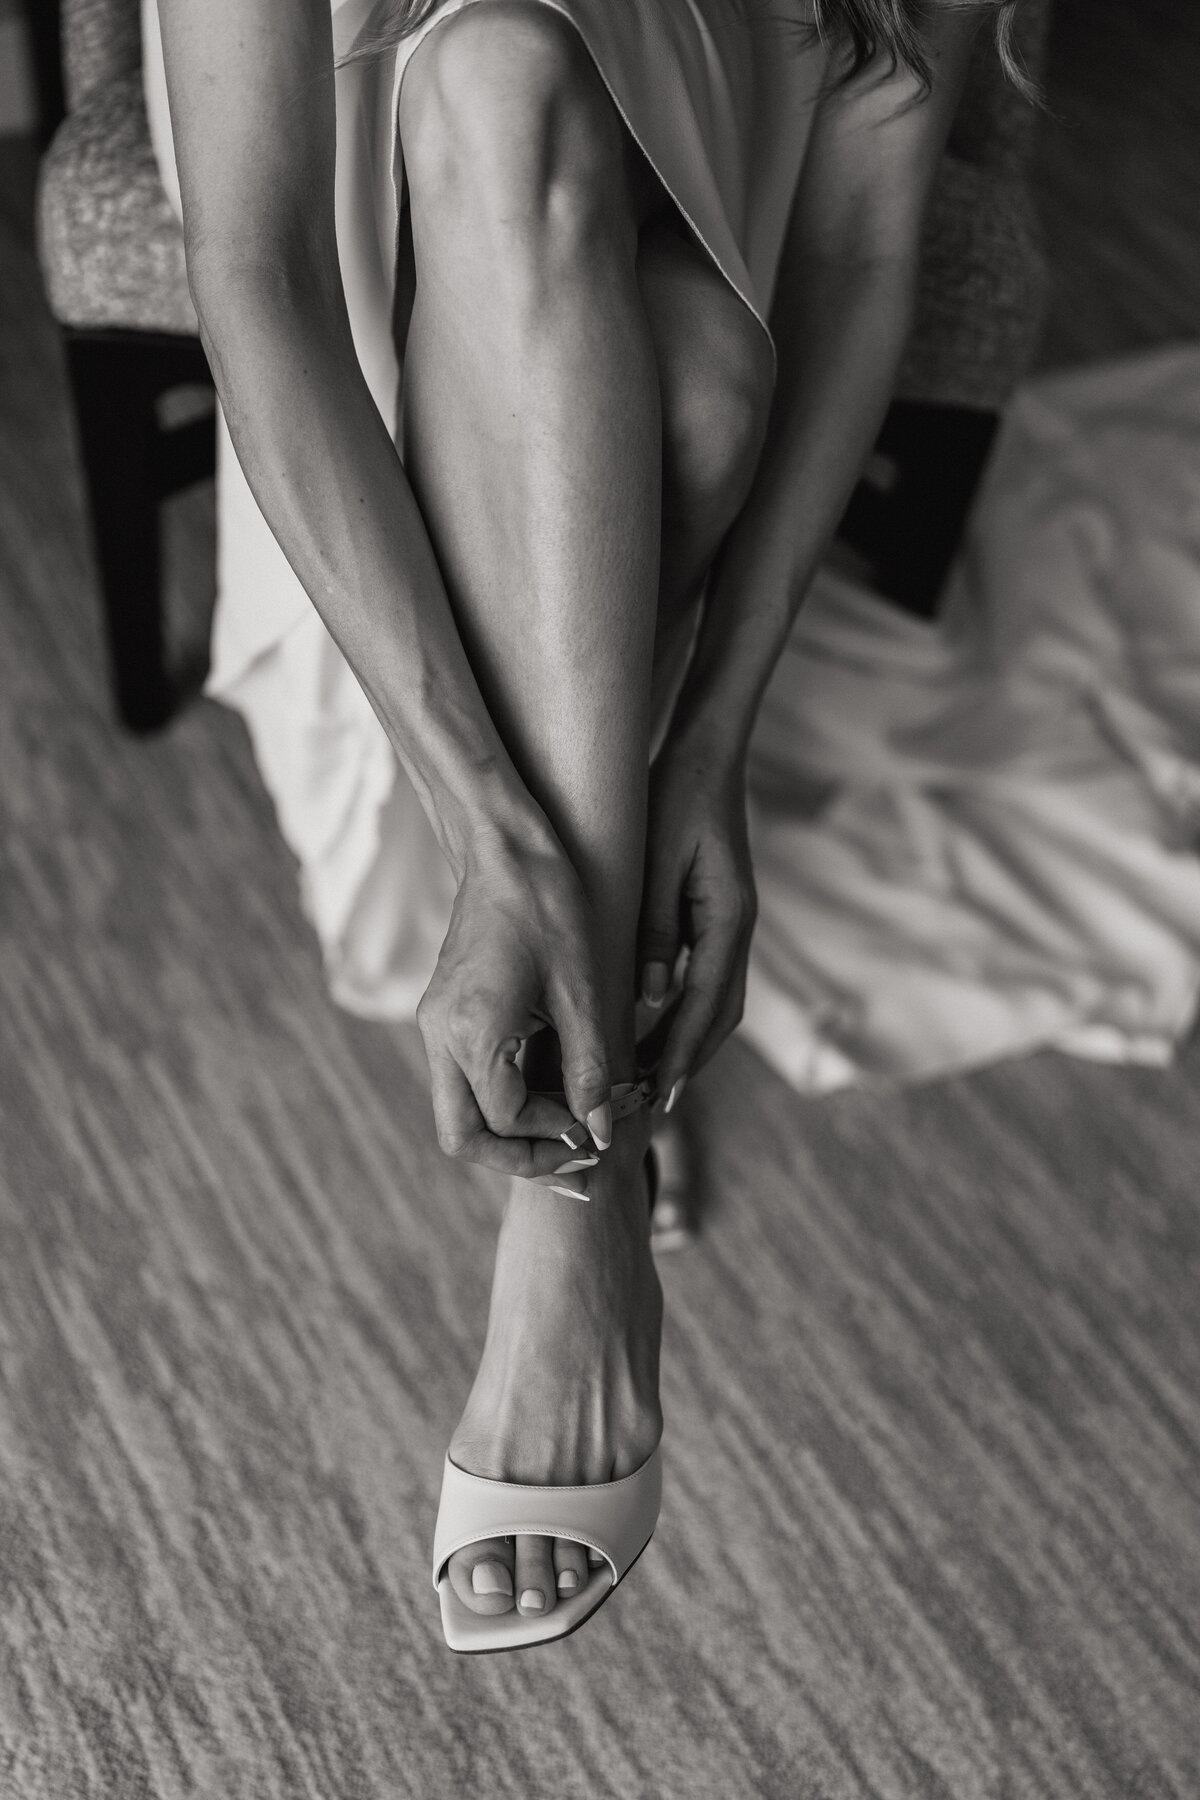 A black and white photograph of Oriel as she gets ready on her wedding day at the Four Seasons Hotel in Westlake Village, California. The photograph is a closeup of the bride's leg, side lit by a window, as she buckles her high heal wedding shoe. Her satin dress is flowing down to the floor behind her. Wedding photography by Stacie McChesney/Vitae Weddings.